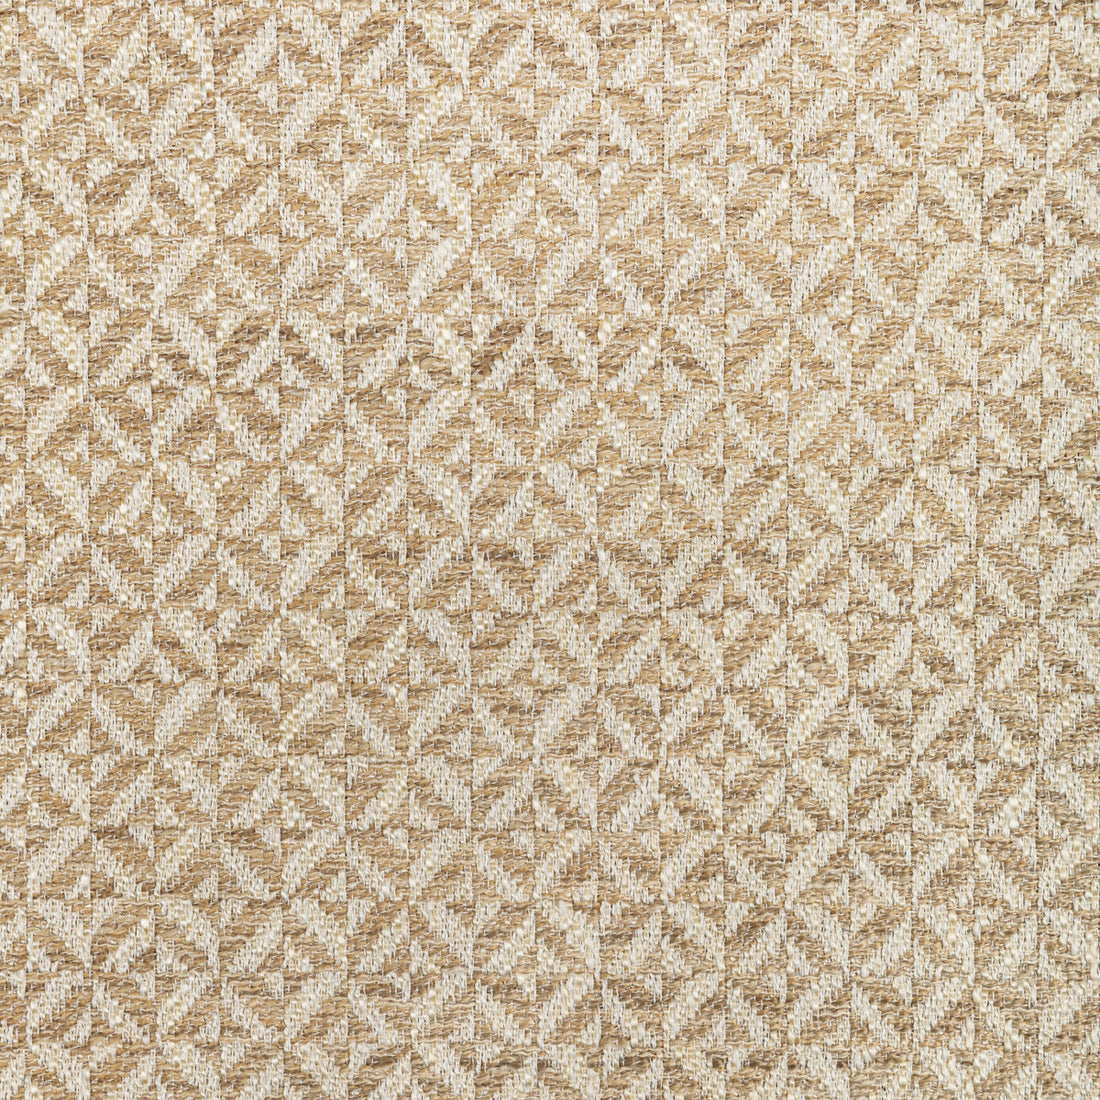 Triana Weave fabric in sand color - pattern 2021105.106.0 - by Lee Jofa in the Triana Weaves collection